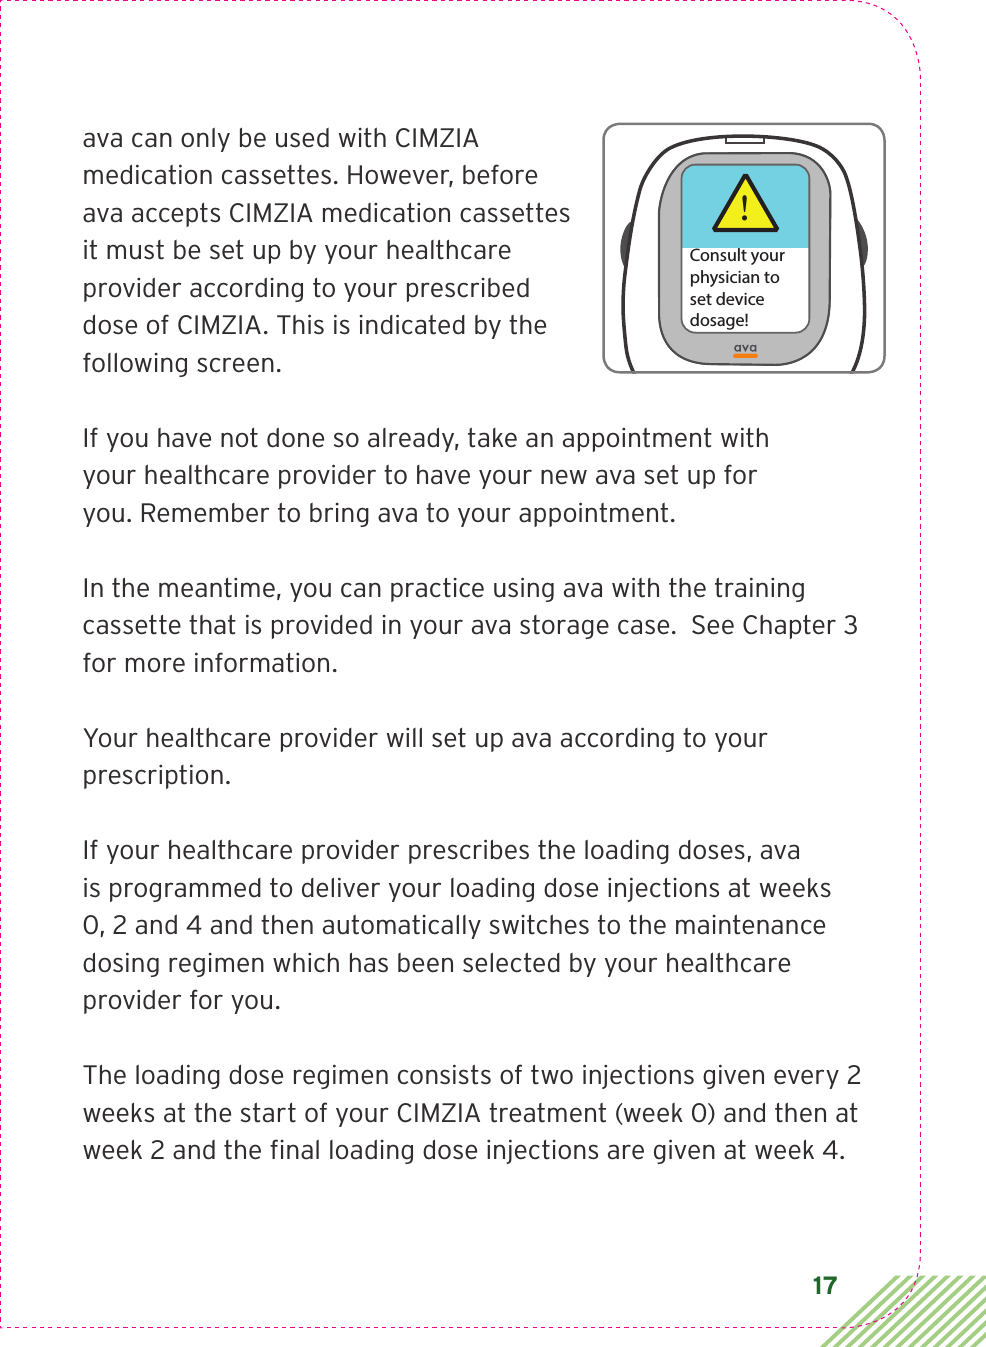 17ava can only be used with CIMZIA medication cassettes. However, before ava accepts CIMZIA medication cassettes it must be set up by your healthcare provider according to your prescribed dose of CIMZIA. This is indicated by the following screen. If you have not done so already, take an appointment with  your healthcare provider to have your new ava set up for  you. Remember to bring ava to your appointment. In the meantime, you can practice using ava with the training cassette that is provided in your ava storage case.  See Chapter 3 for more information.Your healthcare provider will set up ava according to your prescription. If your healthcare provider prescribes the loading doses, ava  is programmed to deliver your loading dose injections at weeks  0, 2 and 4 and then automatically switches to the maintenance  dosing regimen which has been selected by your healthcare provider for you. The loading dose regimen consists of two injections given every 2 weeks at the start of your CIMZIA treatment (week 0) and then at week 2 and the ﬁnal loading dose injections are given at week 4. !Consult yourphysician toset devicedosage!